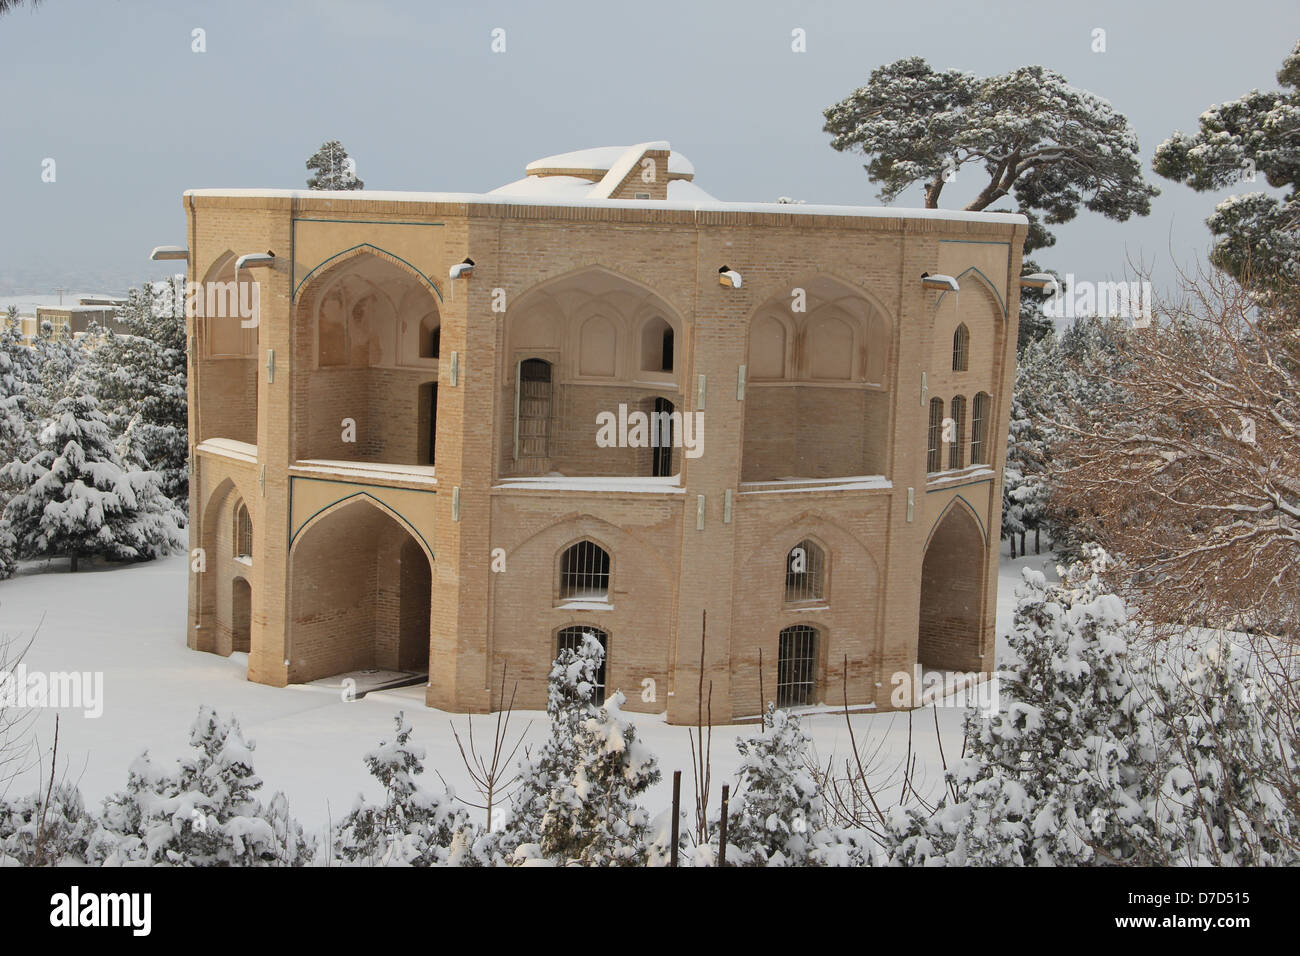 Namakdan(Gazorgah Guest House is a historic building) is under snow in winter Stock Photo